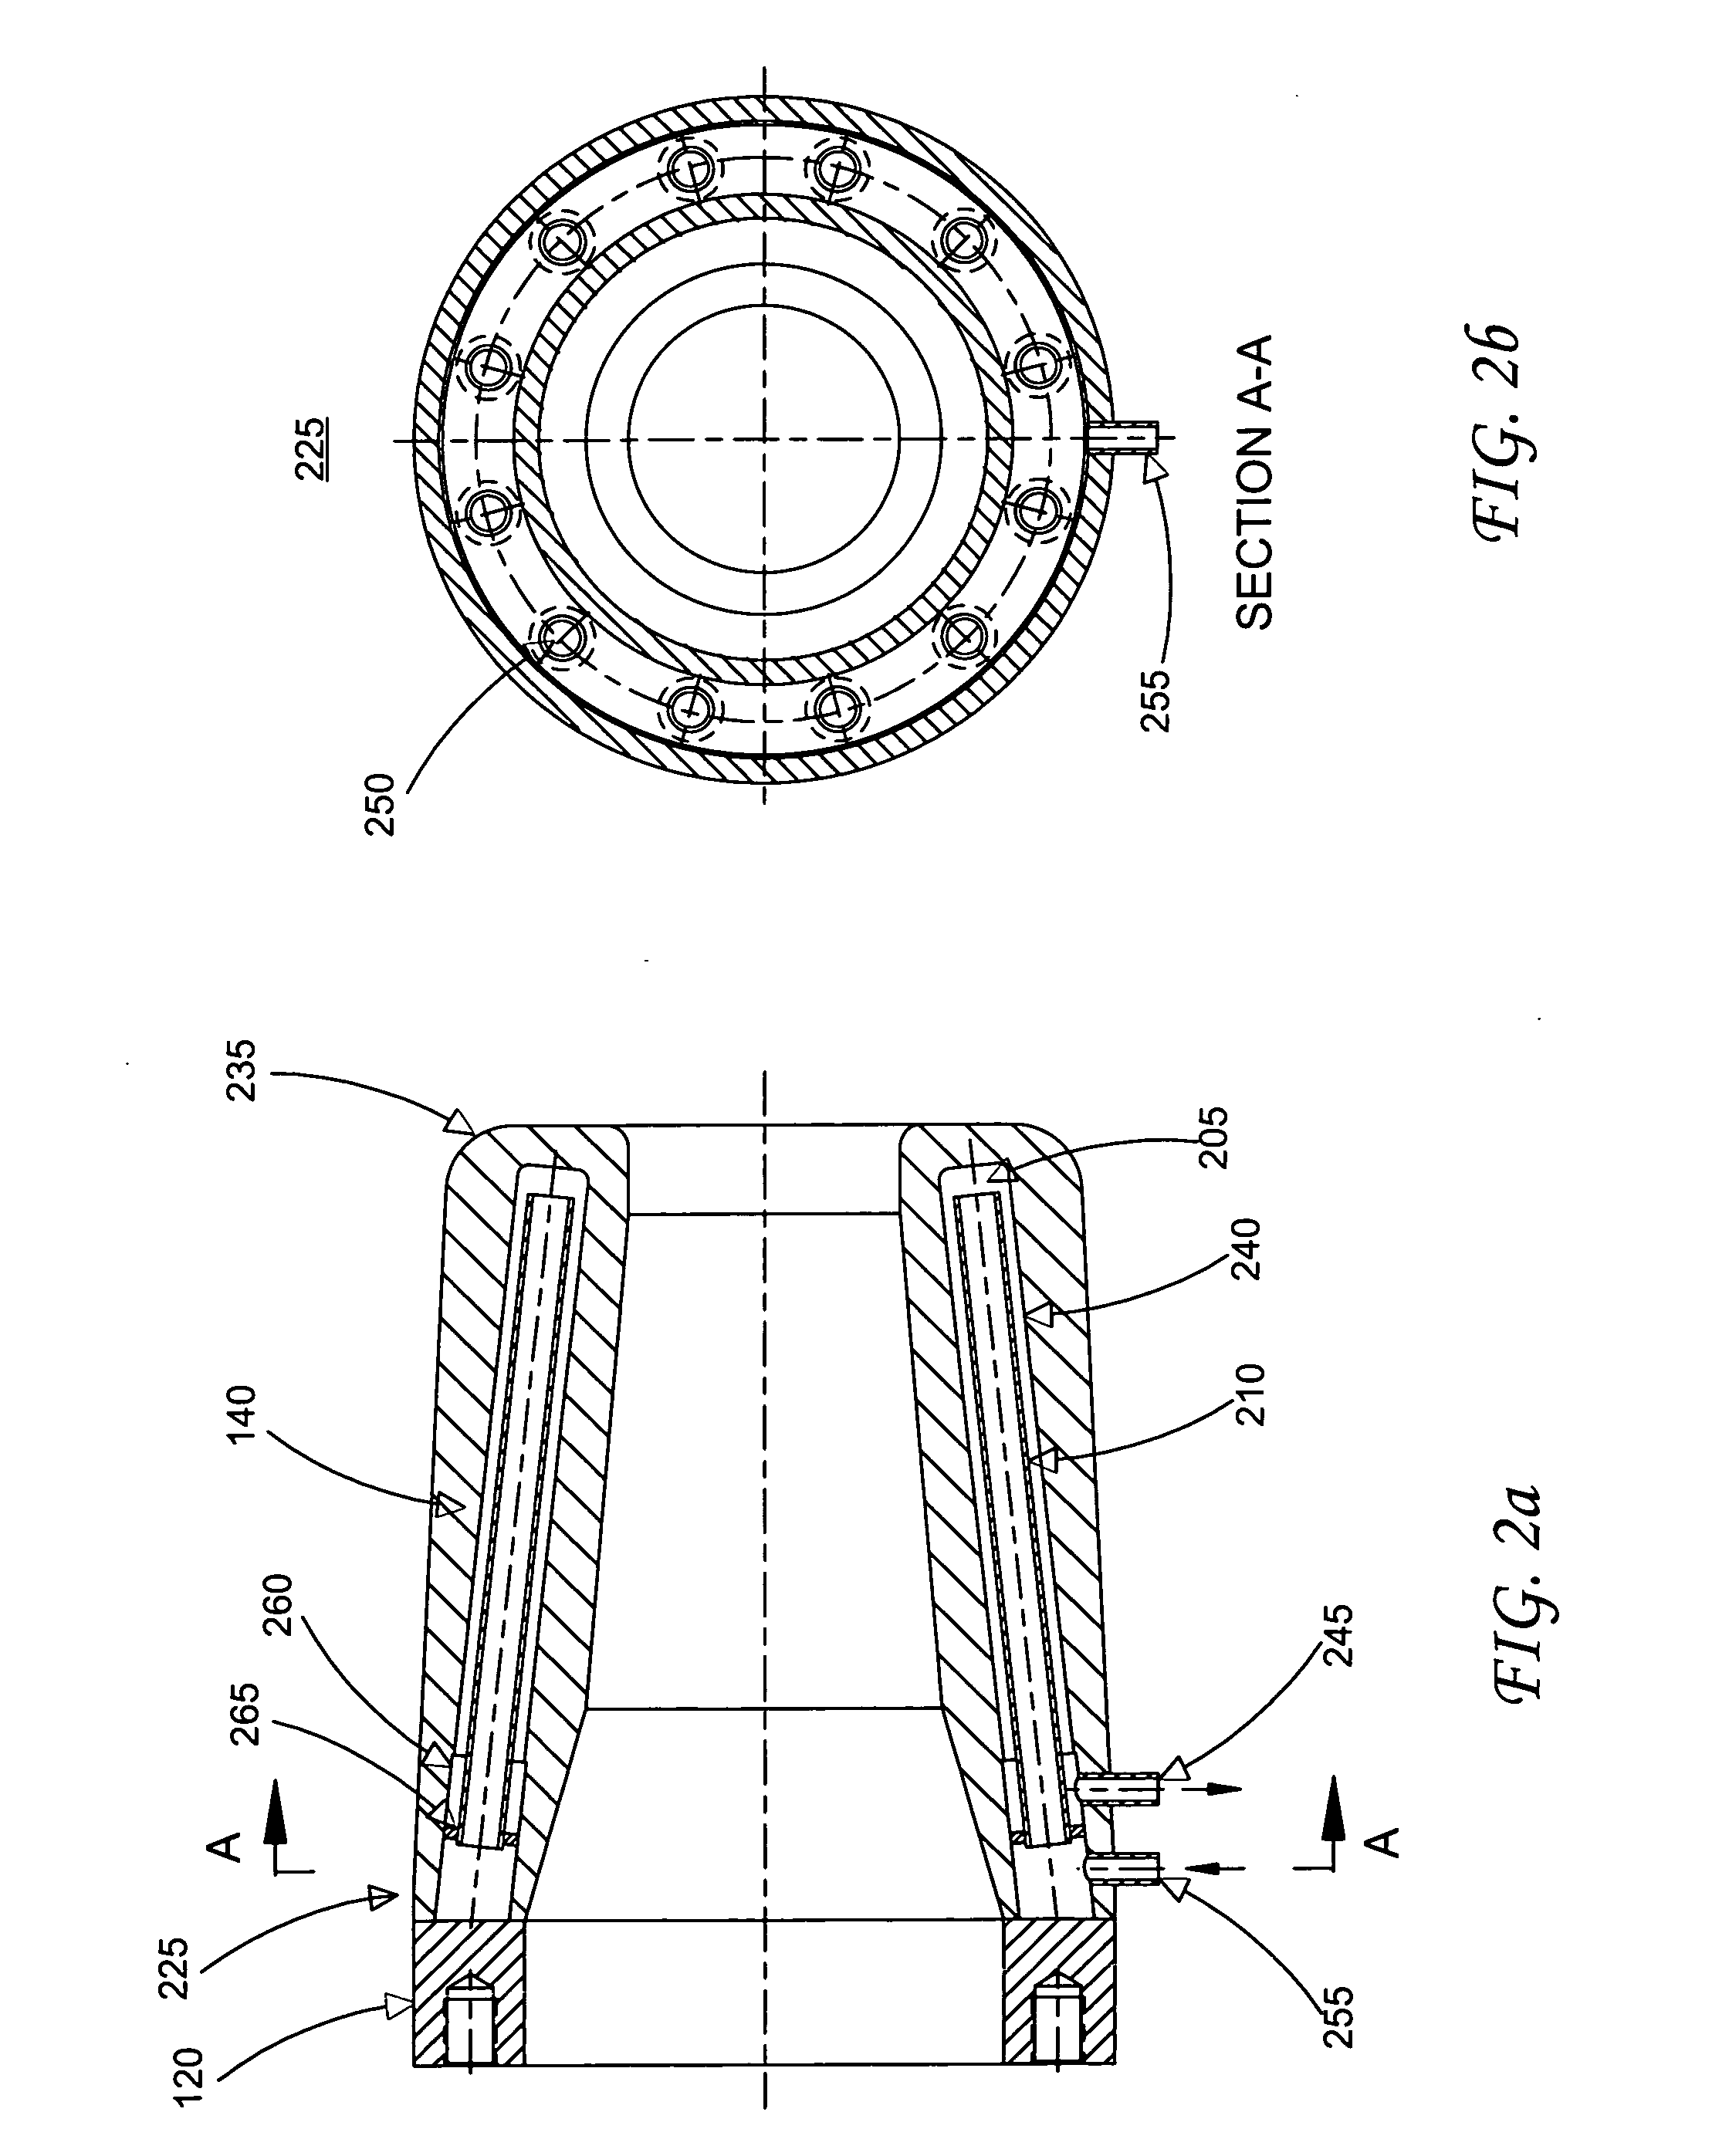 Cooling device for use in an electric arc furnace